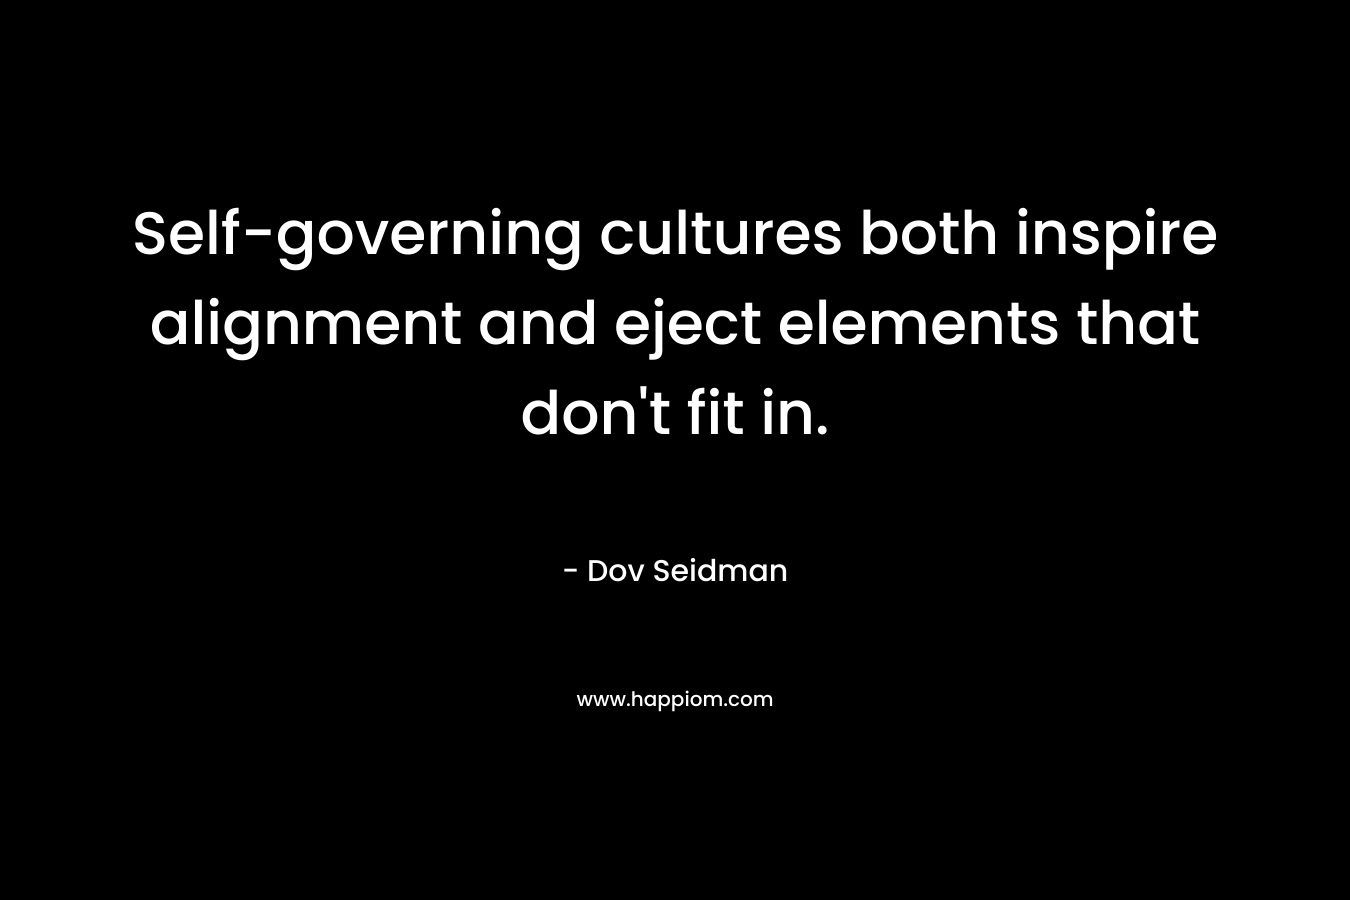 Self-governing cultures both inspire alignment and eject elements that don't fit in.